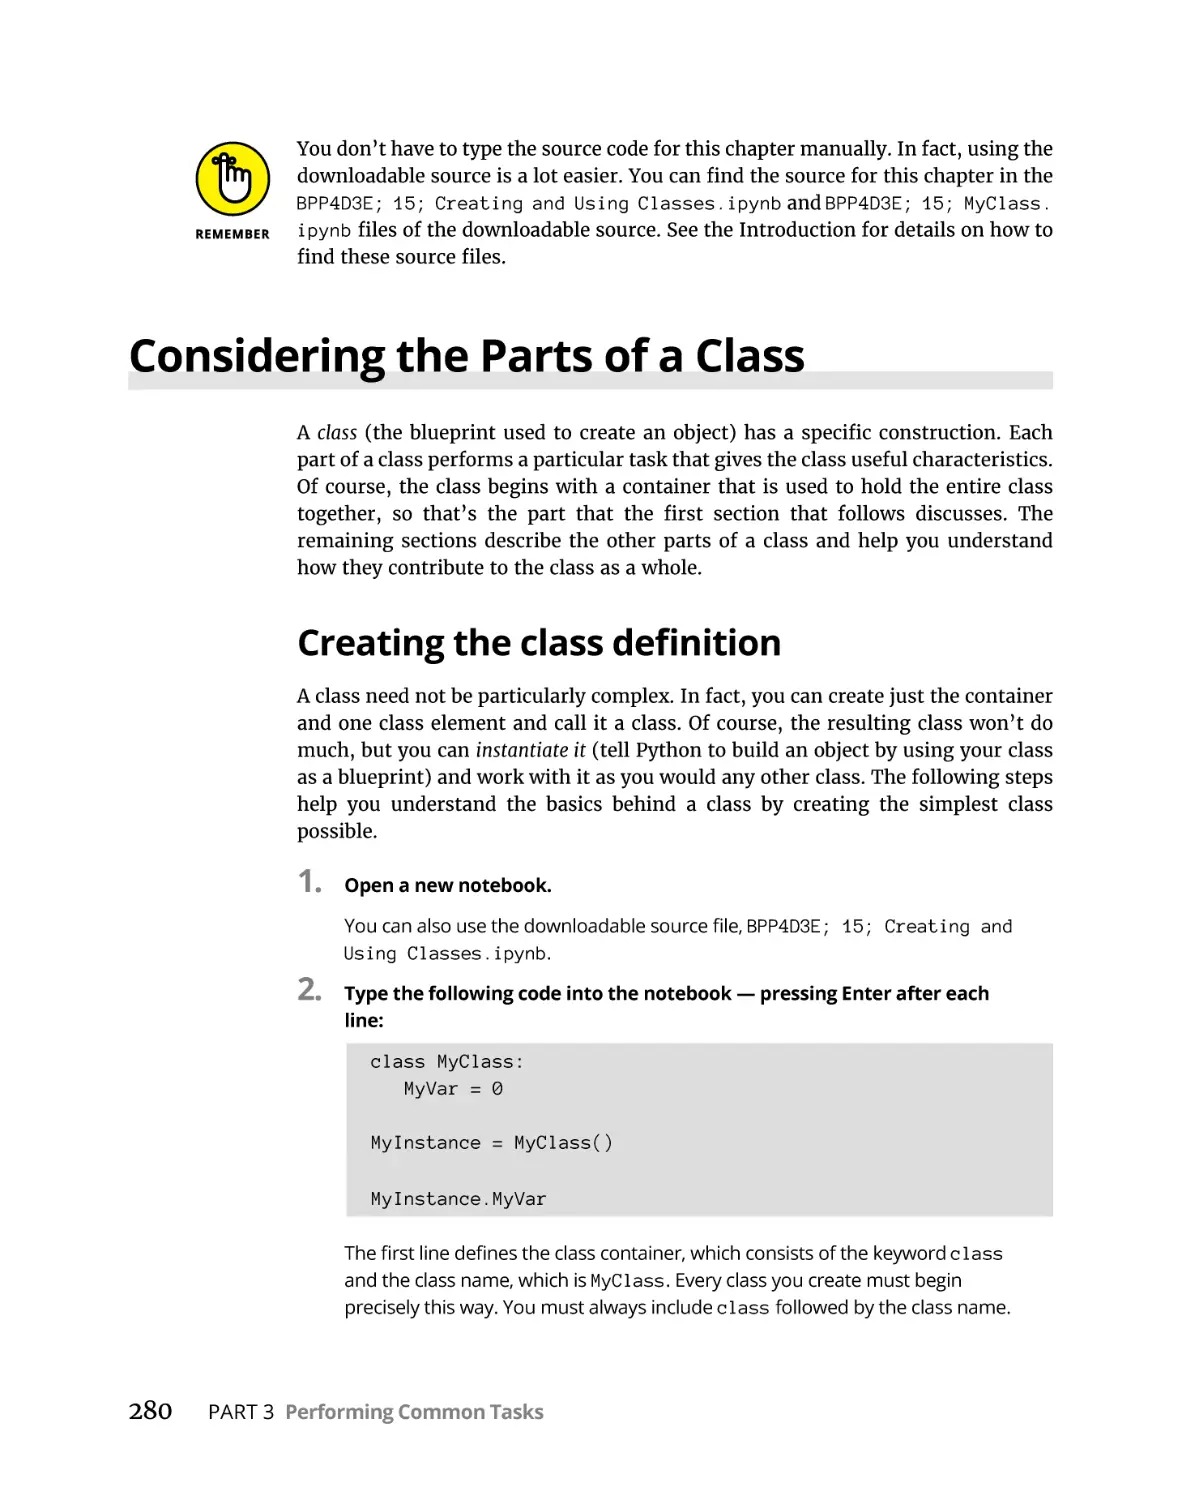 Considering the Parts of a Class
Creating the class definition